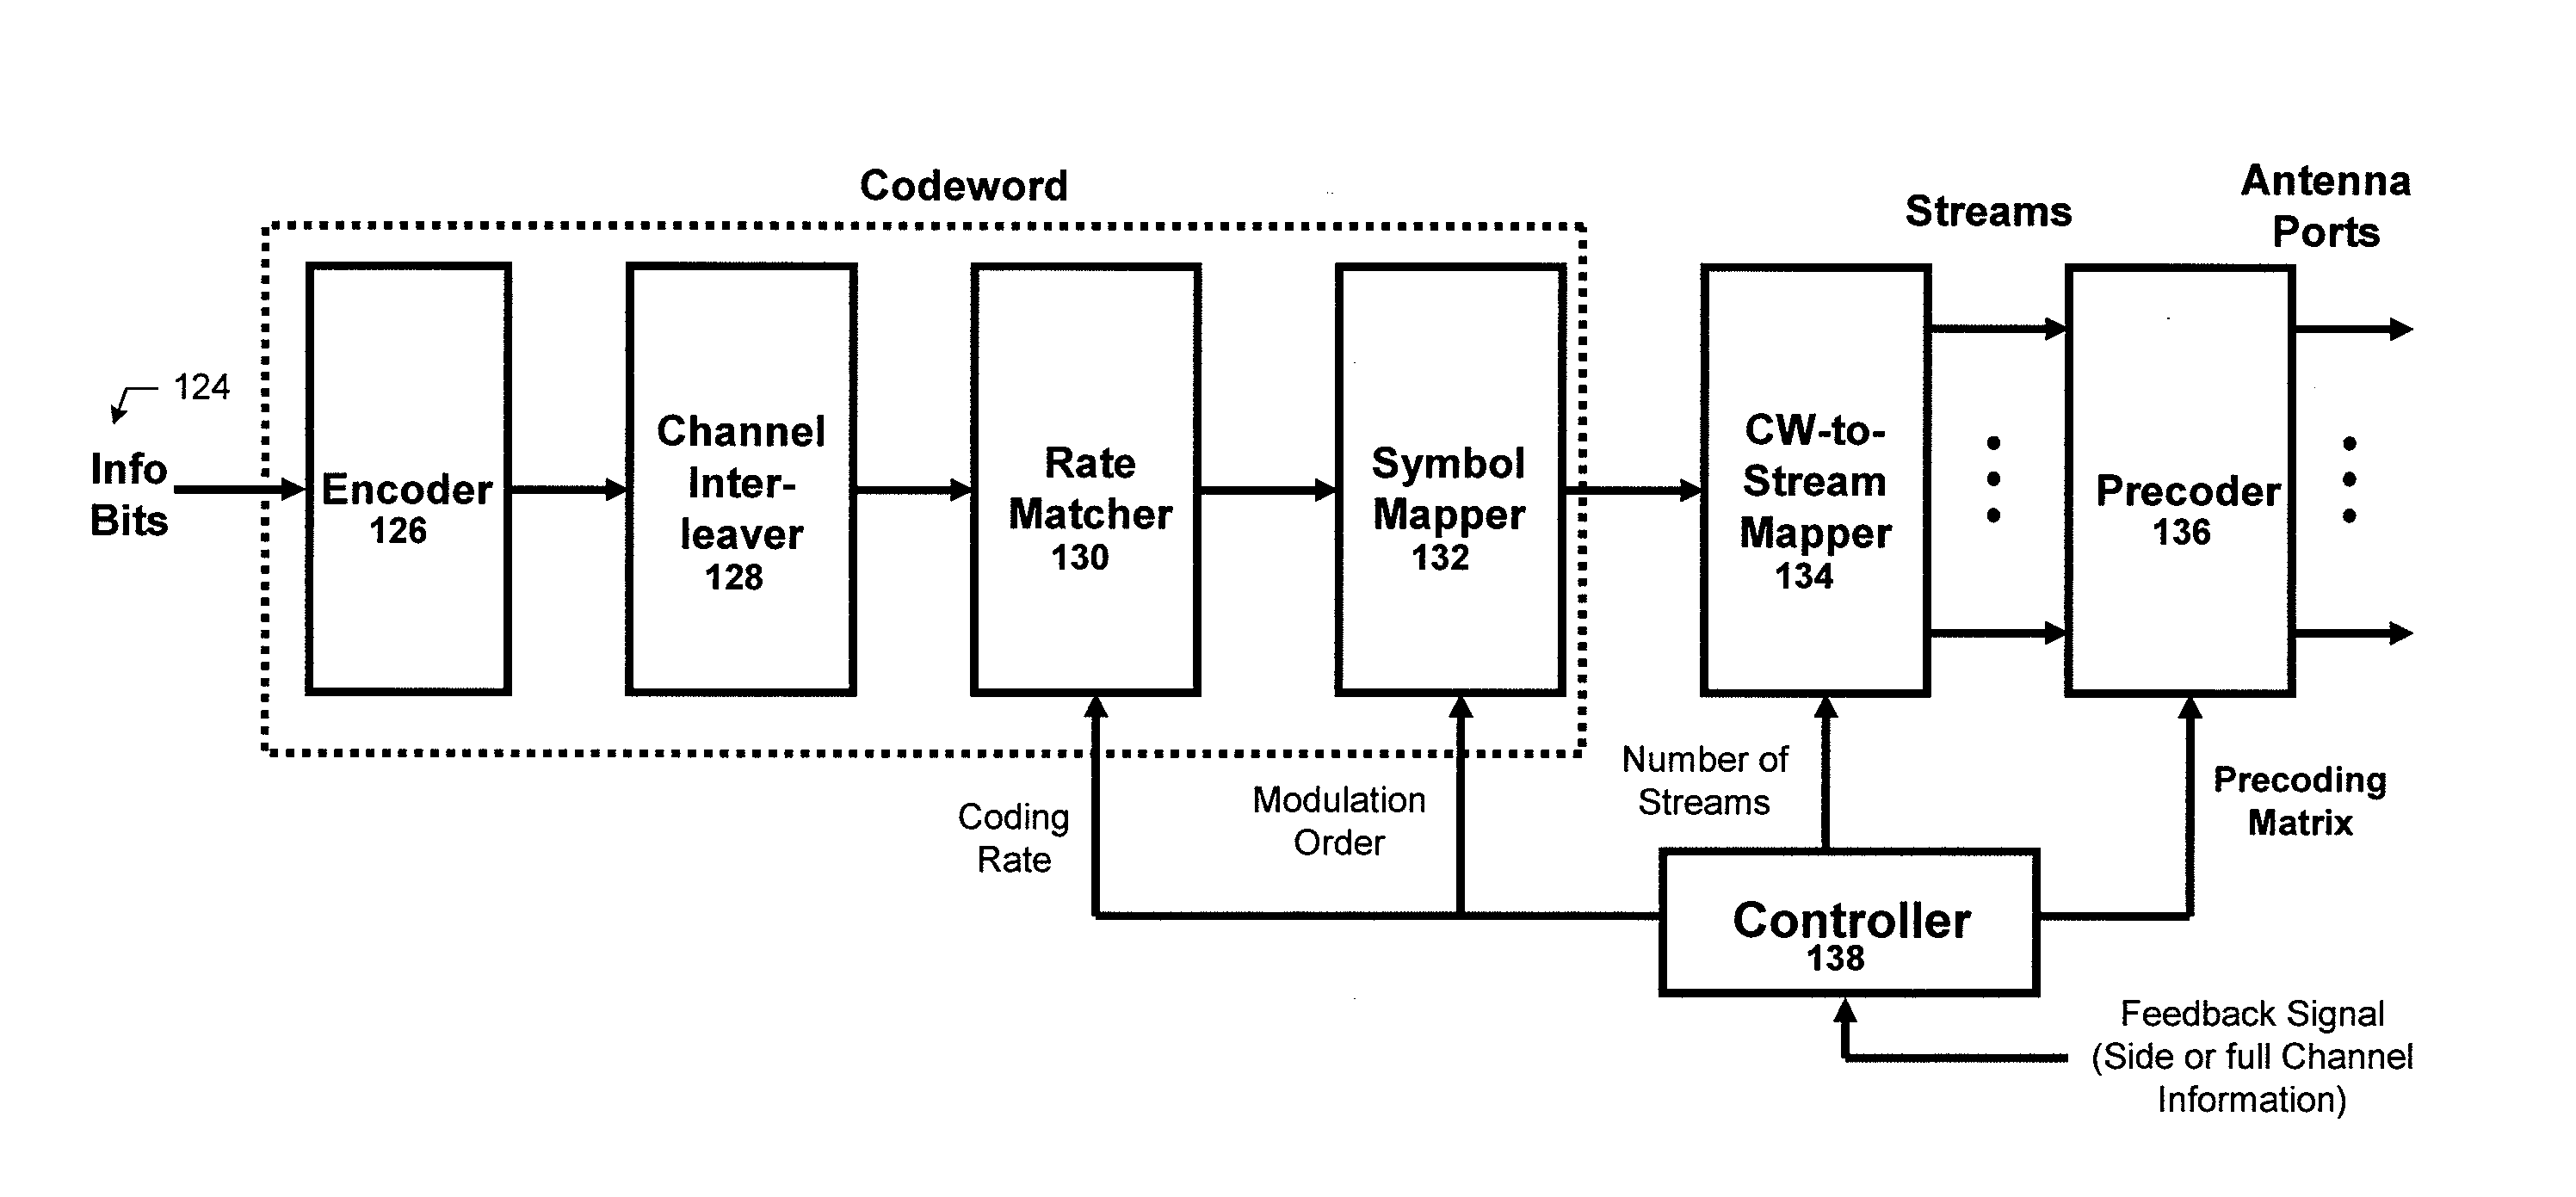 Method and Apparatus for Data Transmission Based on Signal Priority and Channel Reliability